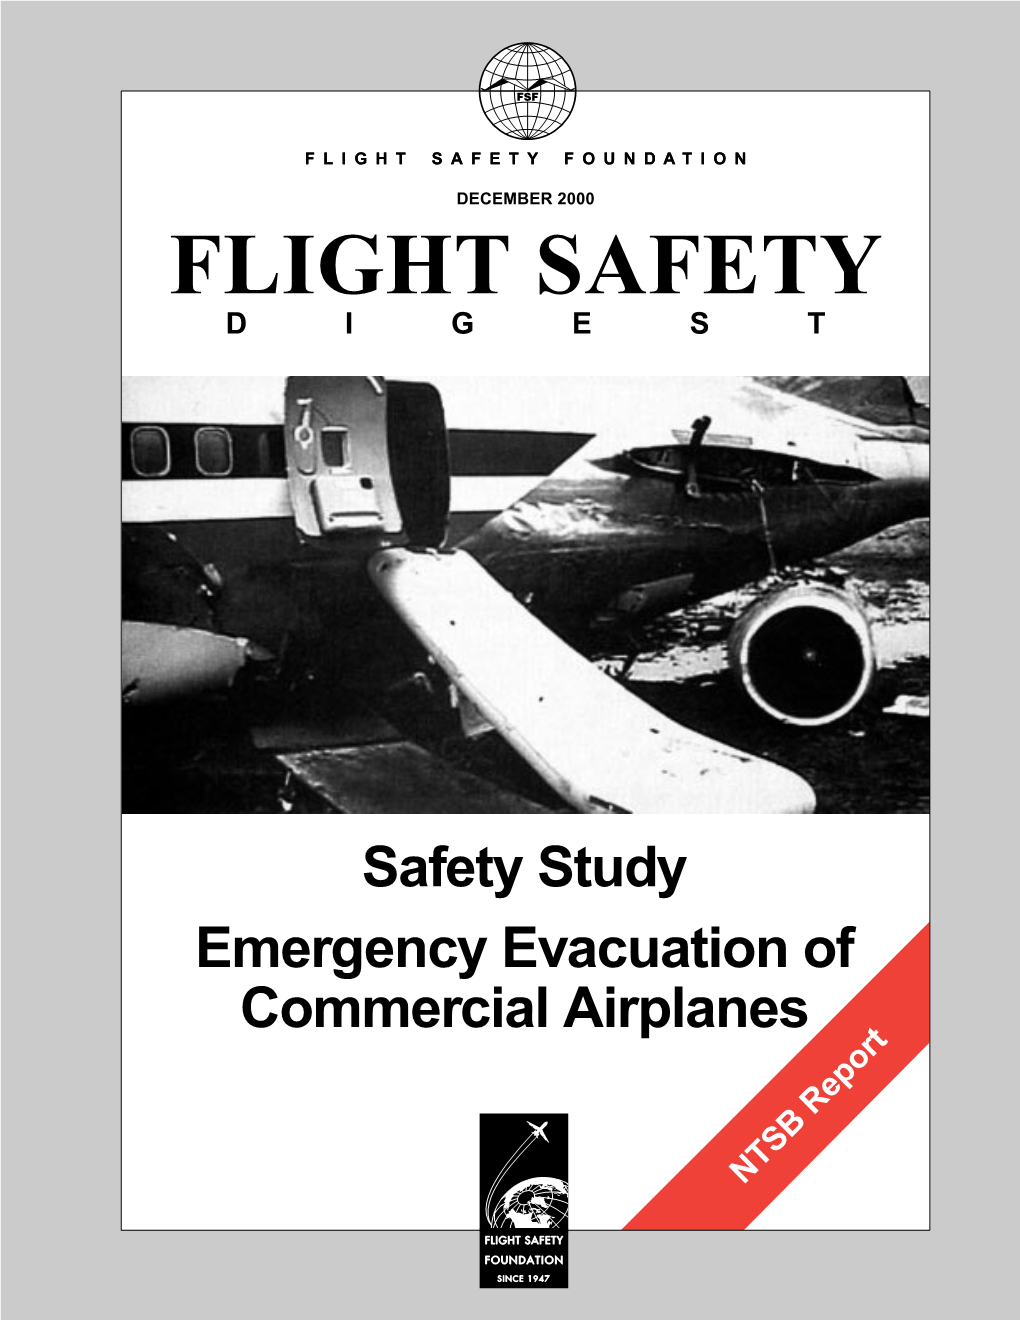 Emergency Evacuation of Commercial Airplanes